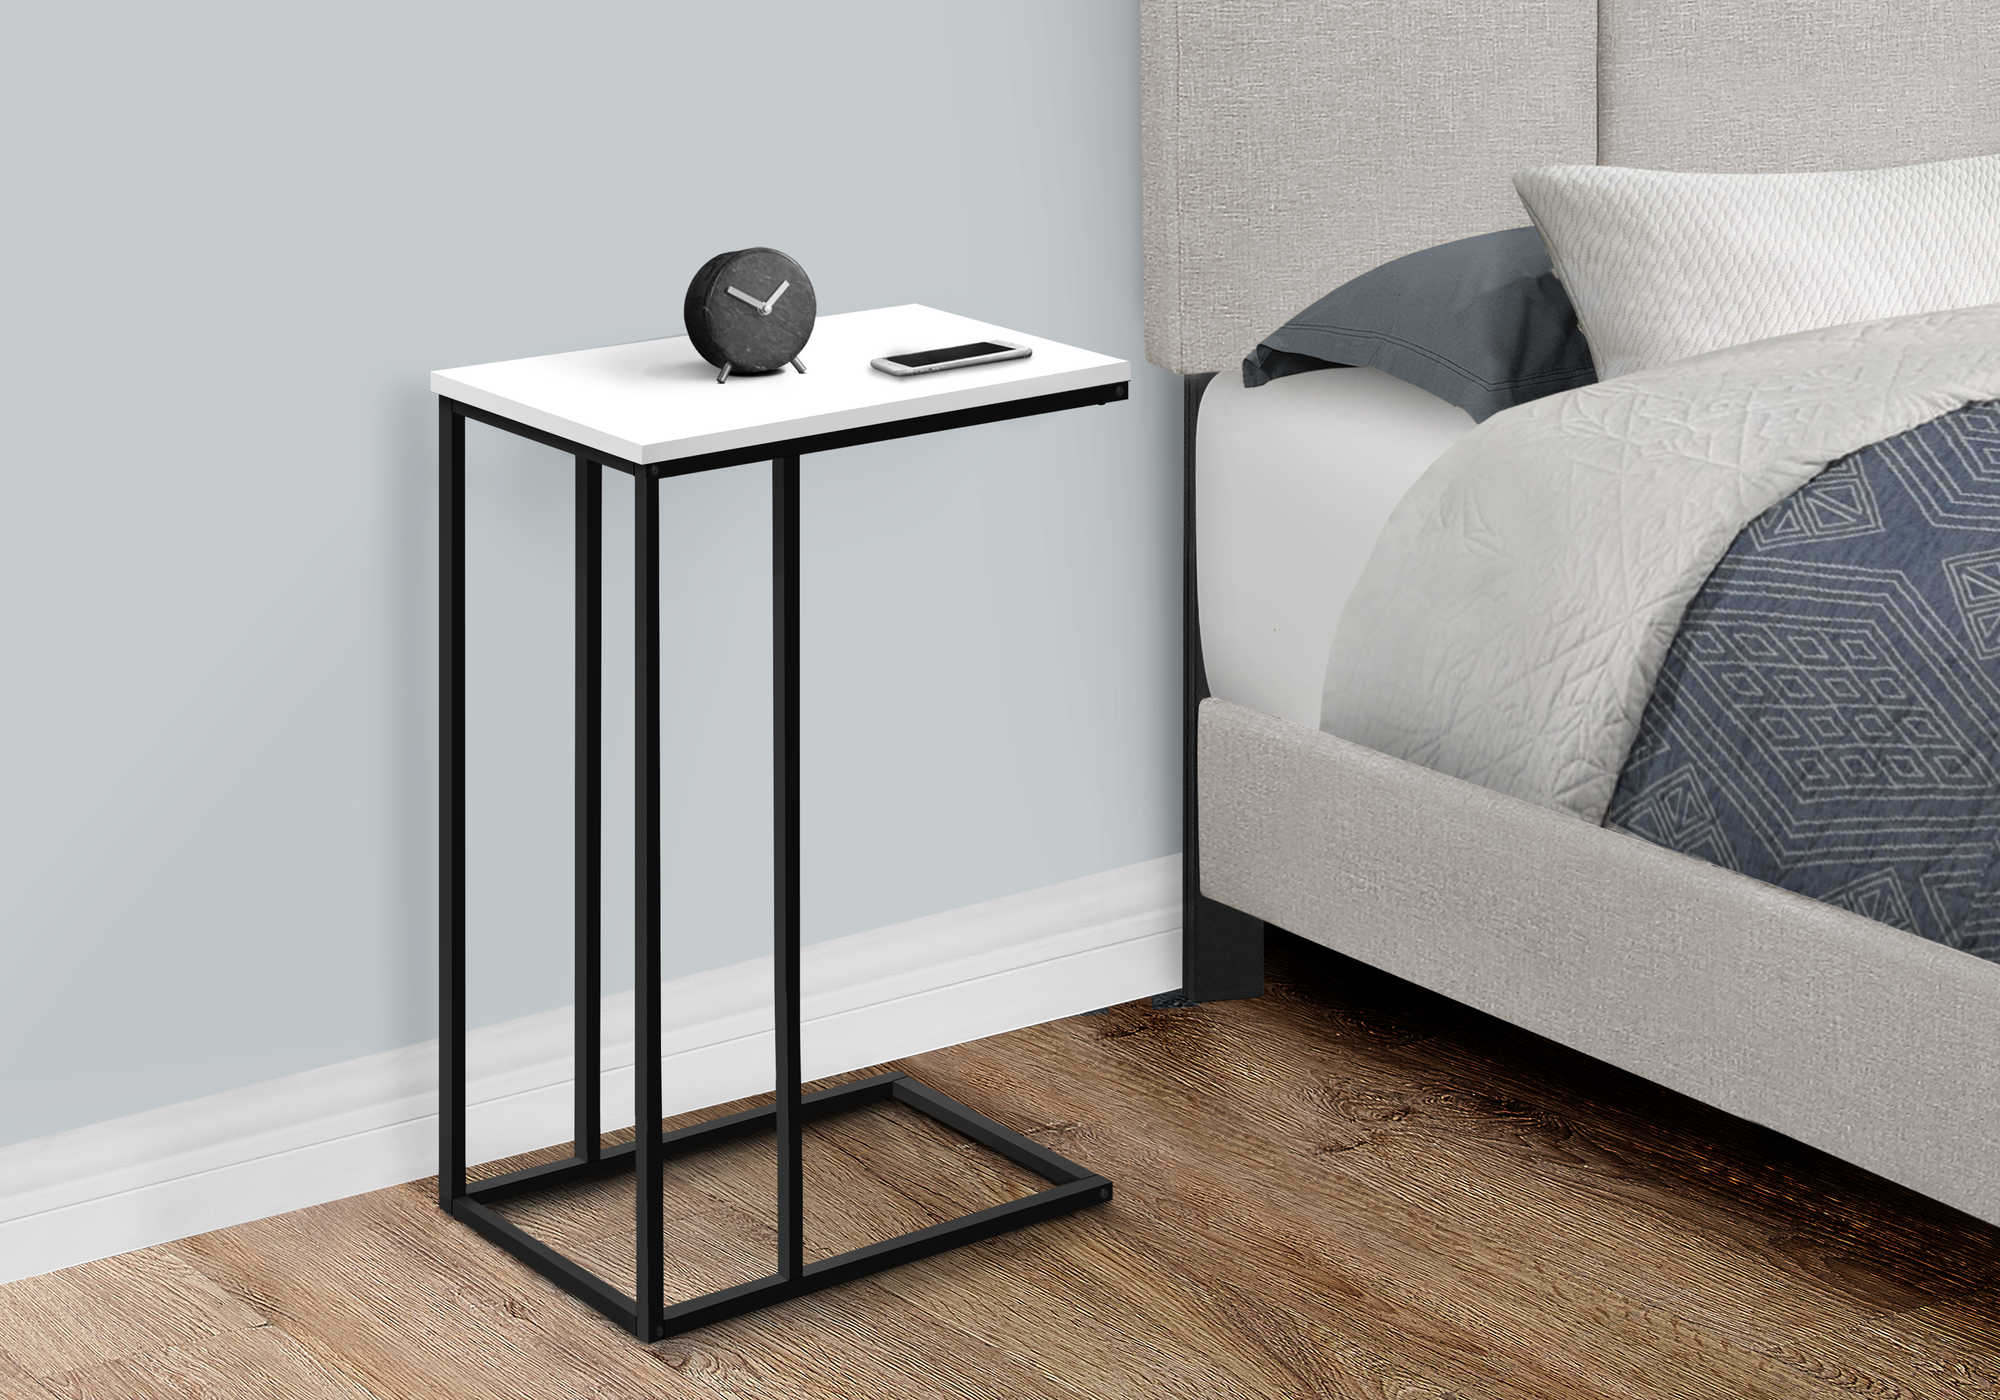 BEDROOM ACCENT TABLE - 25"H / WHITE / BLACK METAL